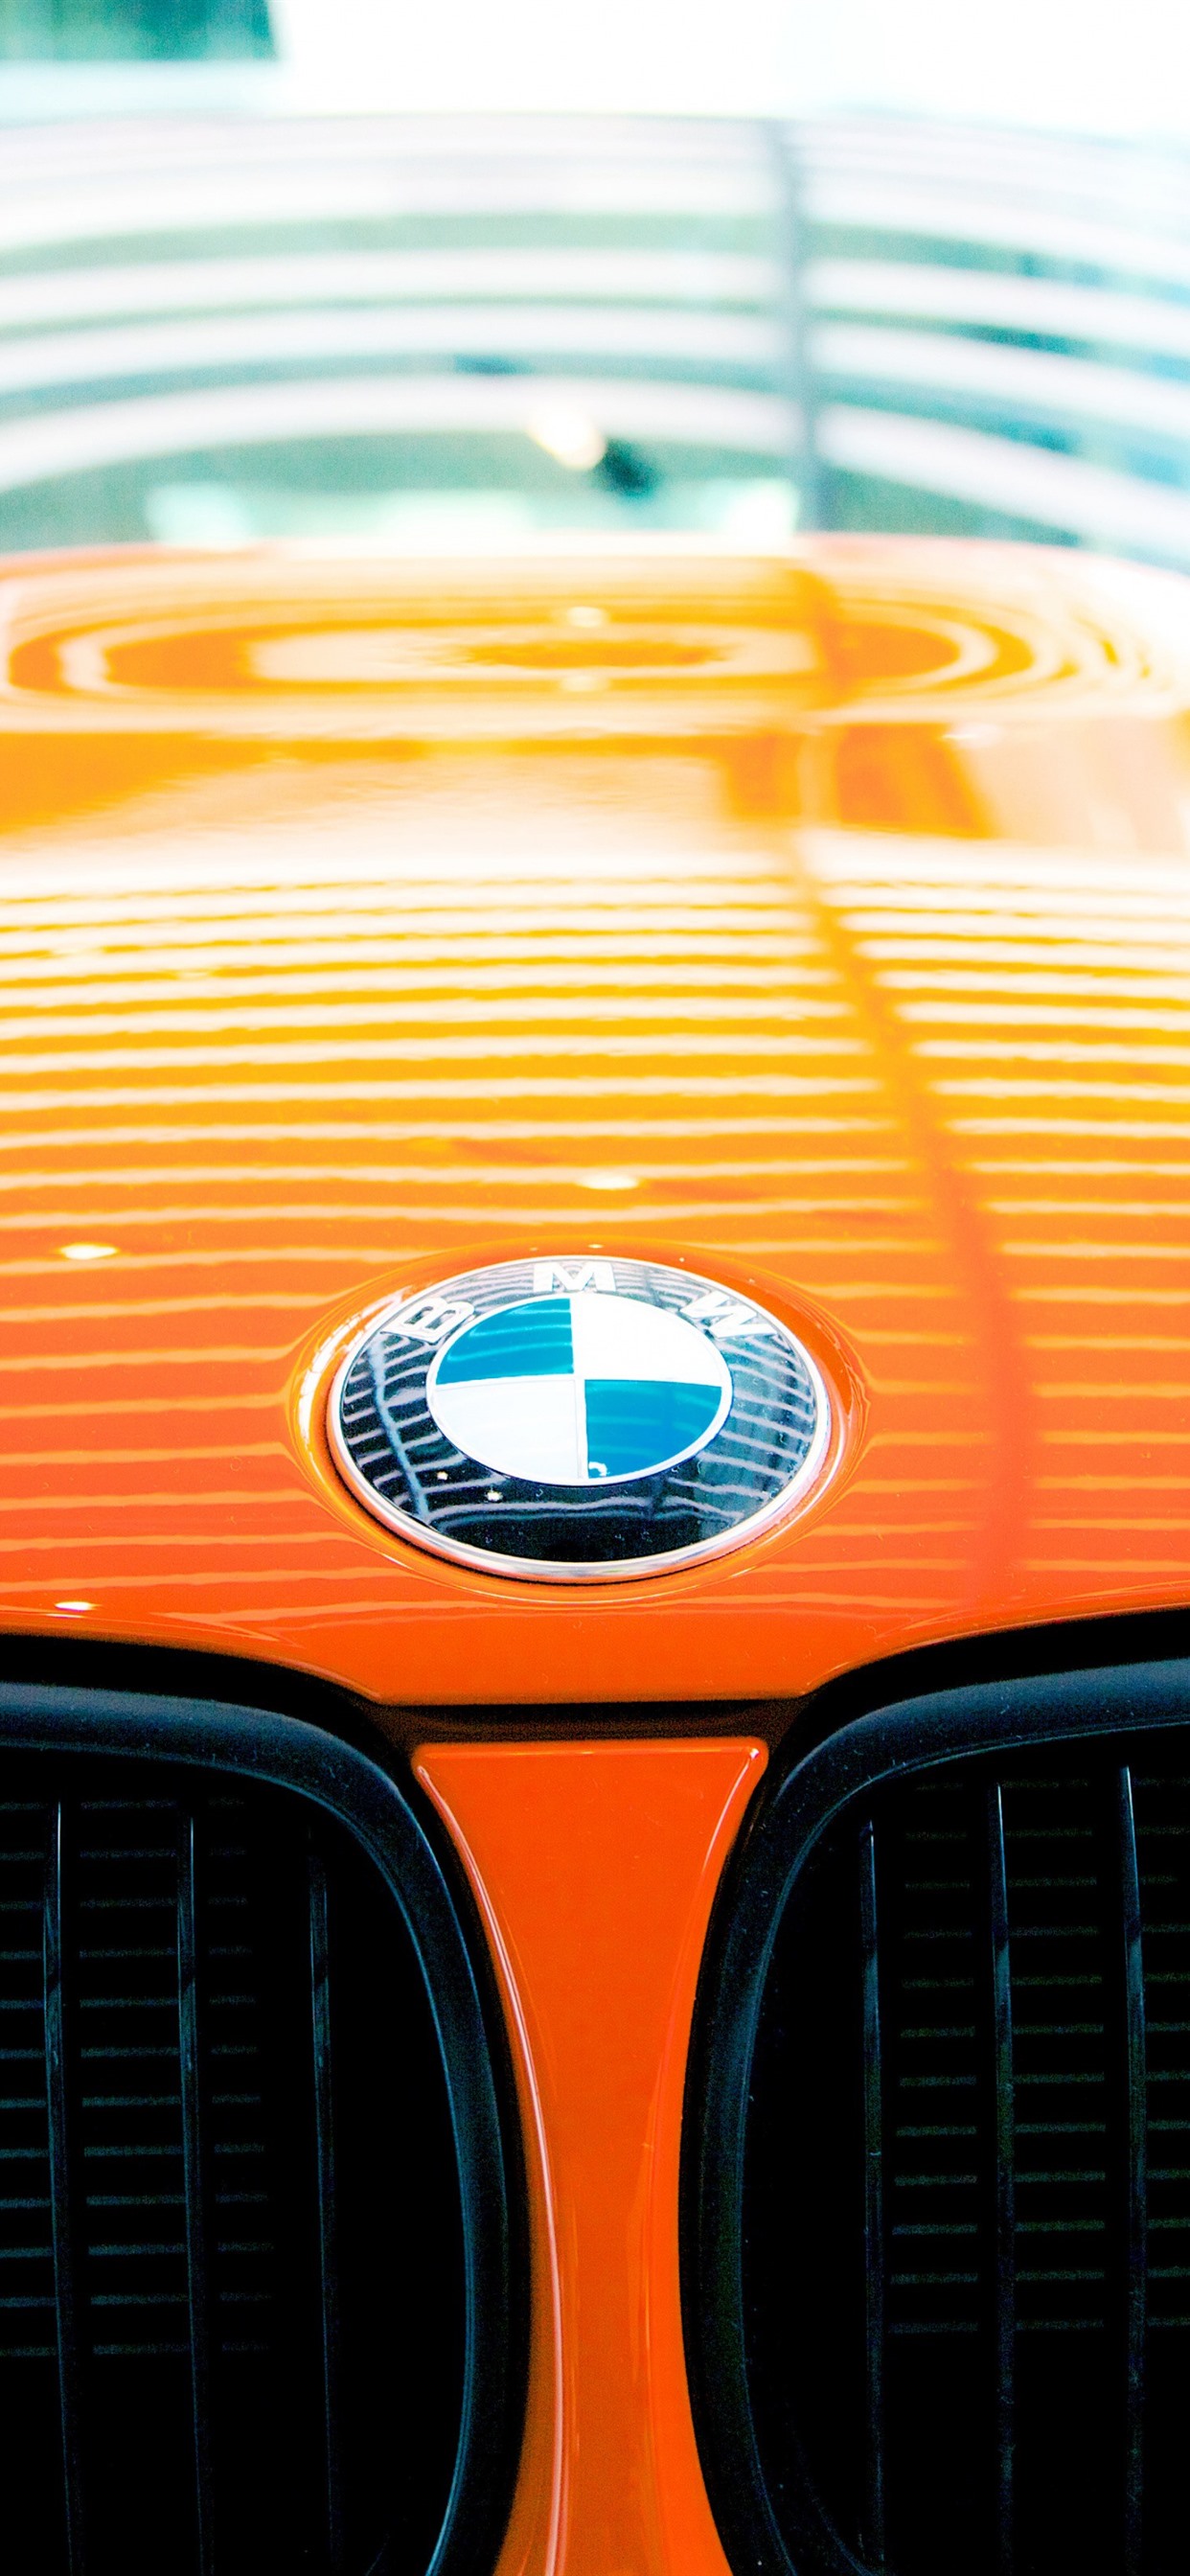 Bmw Iphone Xs Max Wallpapers